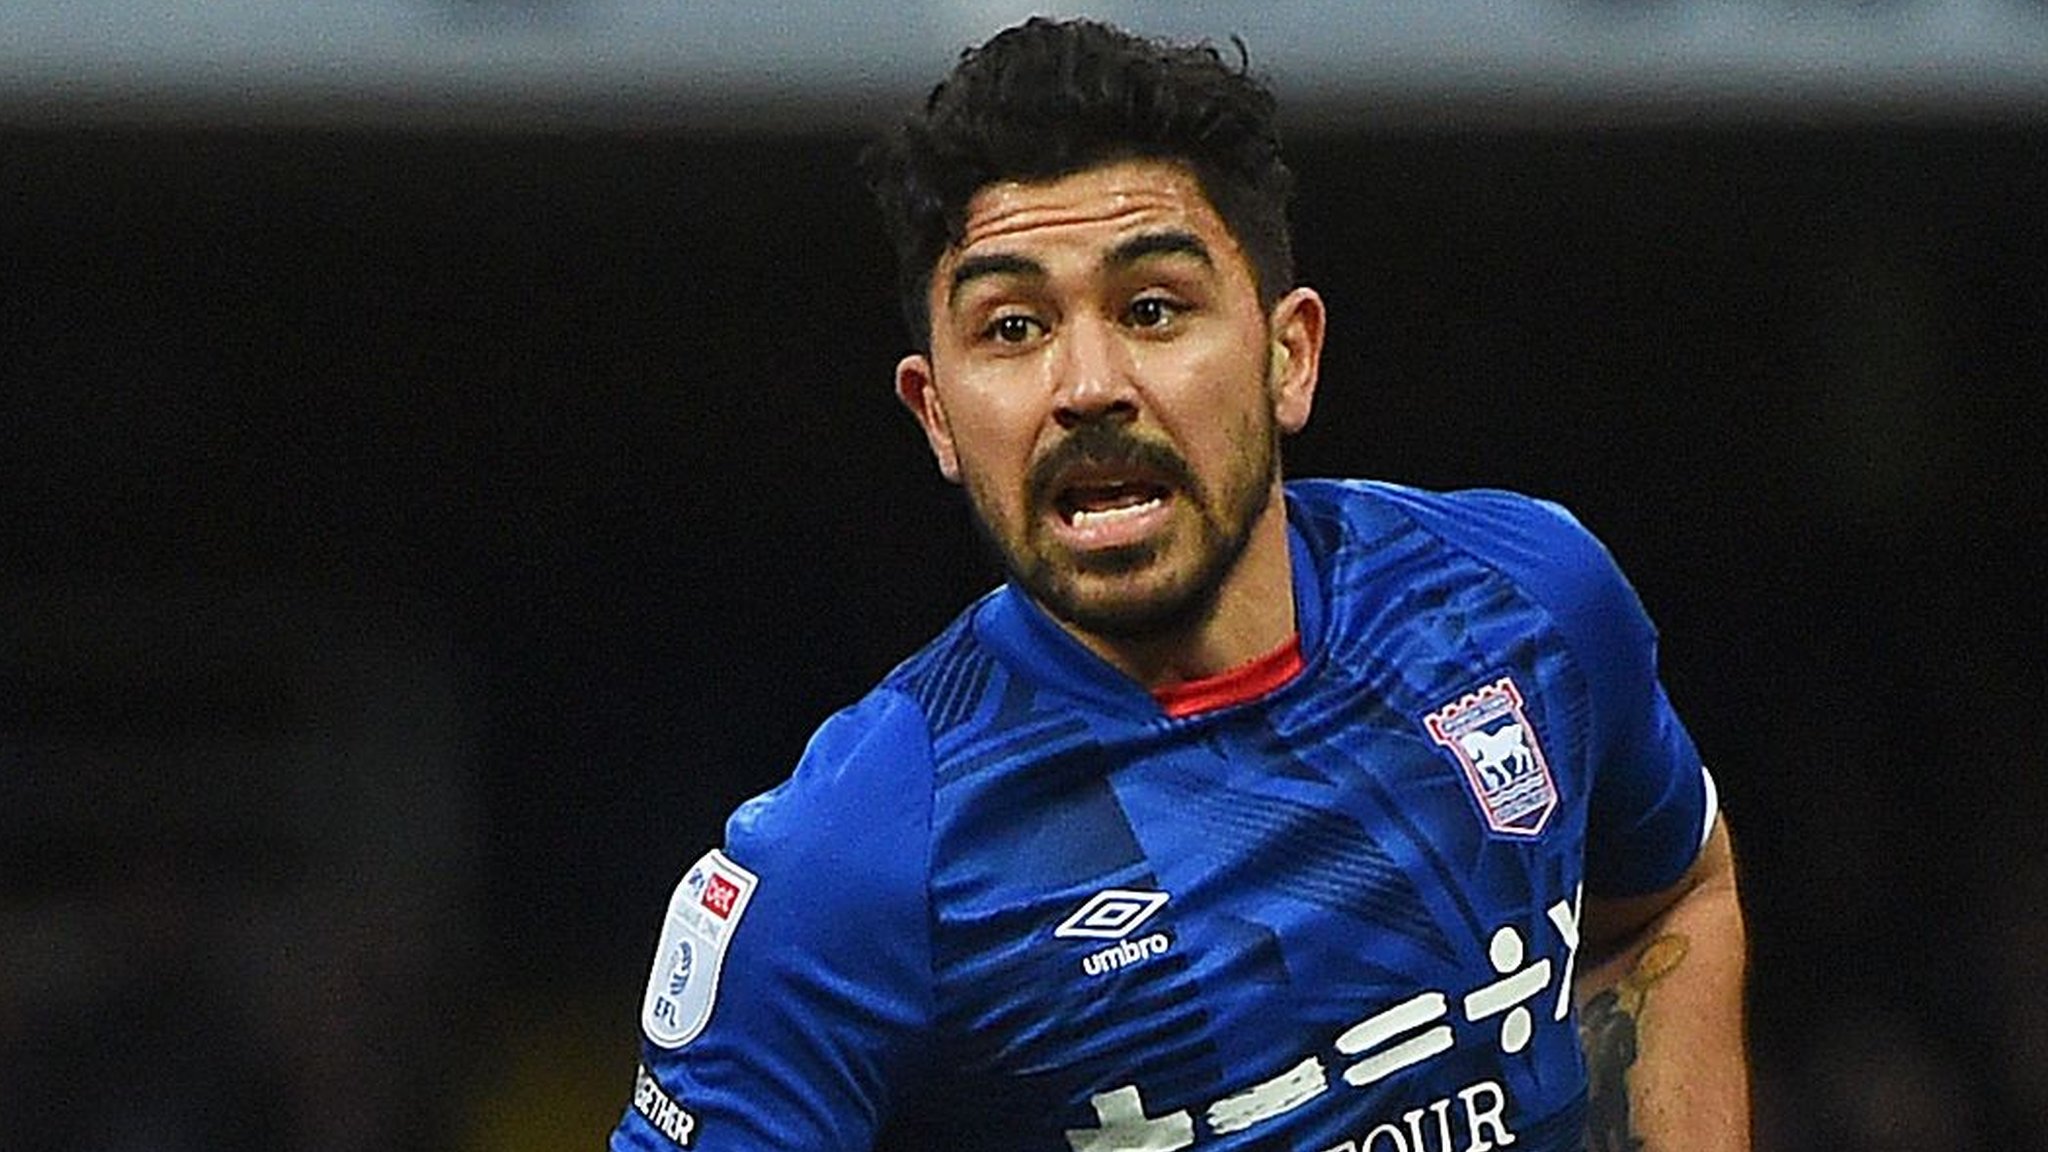 Unbelievable: Ipswich Town’s Massimo Luongo Rejects £86 Million Offer from Real Madrid